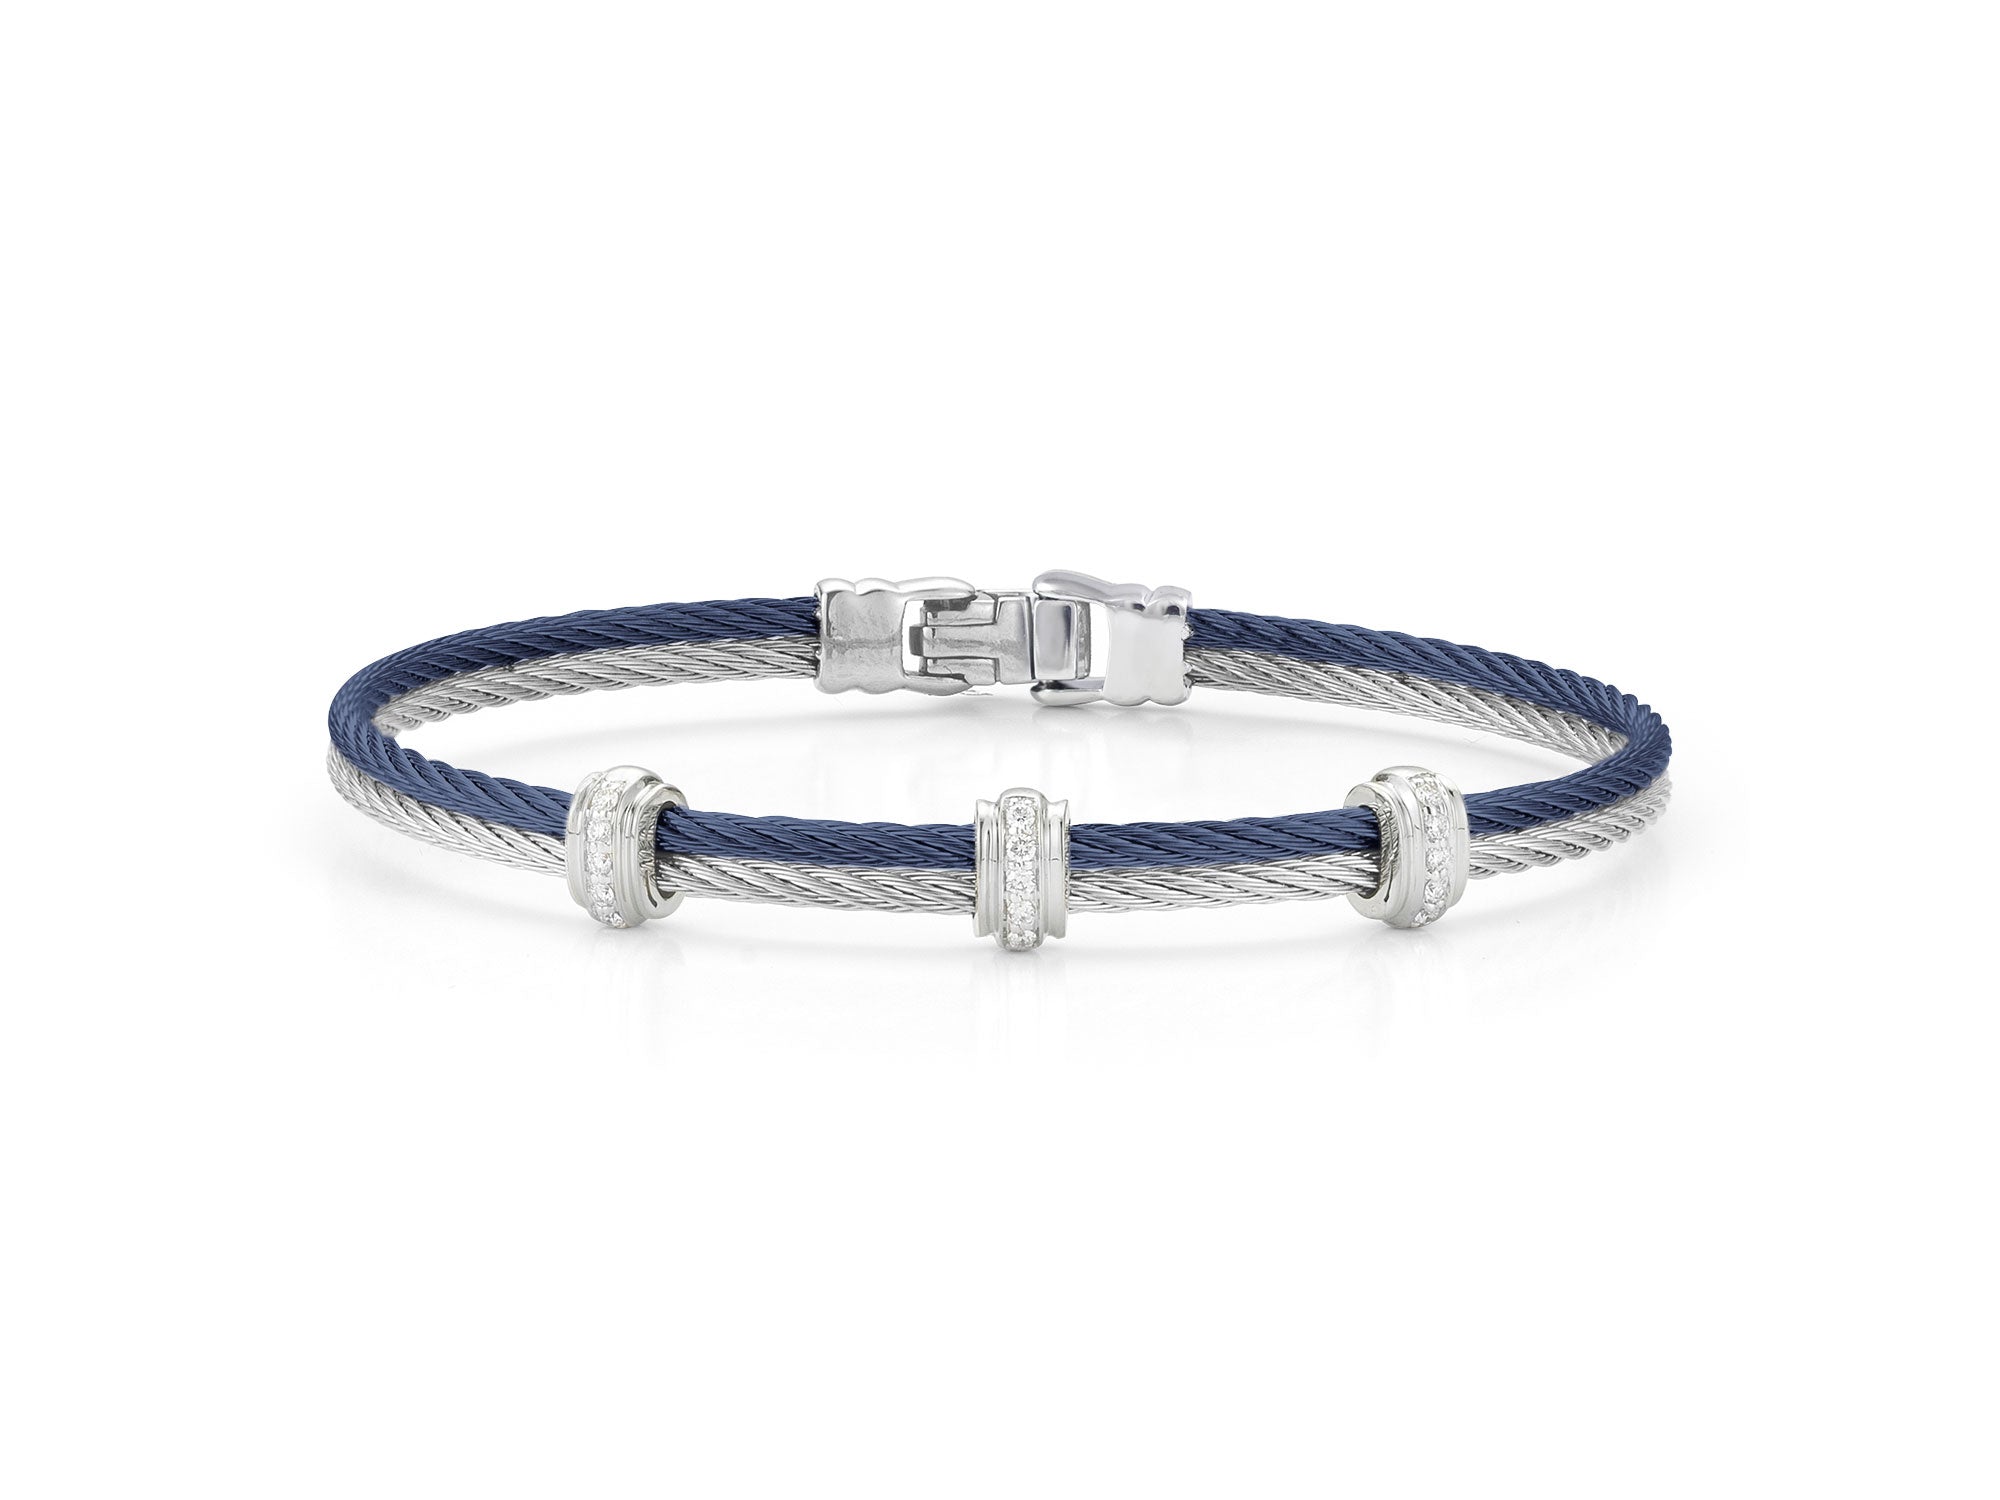 Blueberry & Grey Cable Bracelet with Triple Diamond Stations